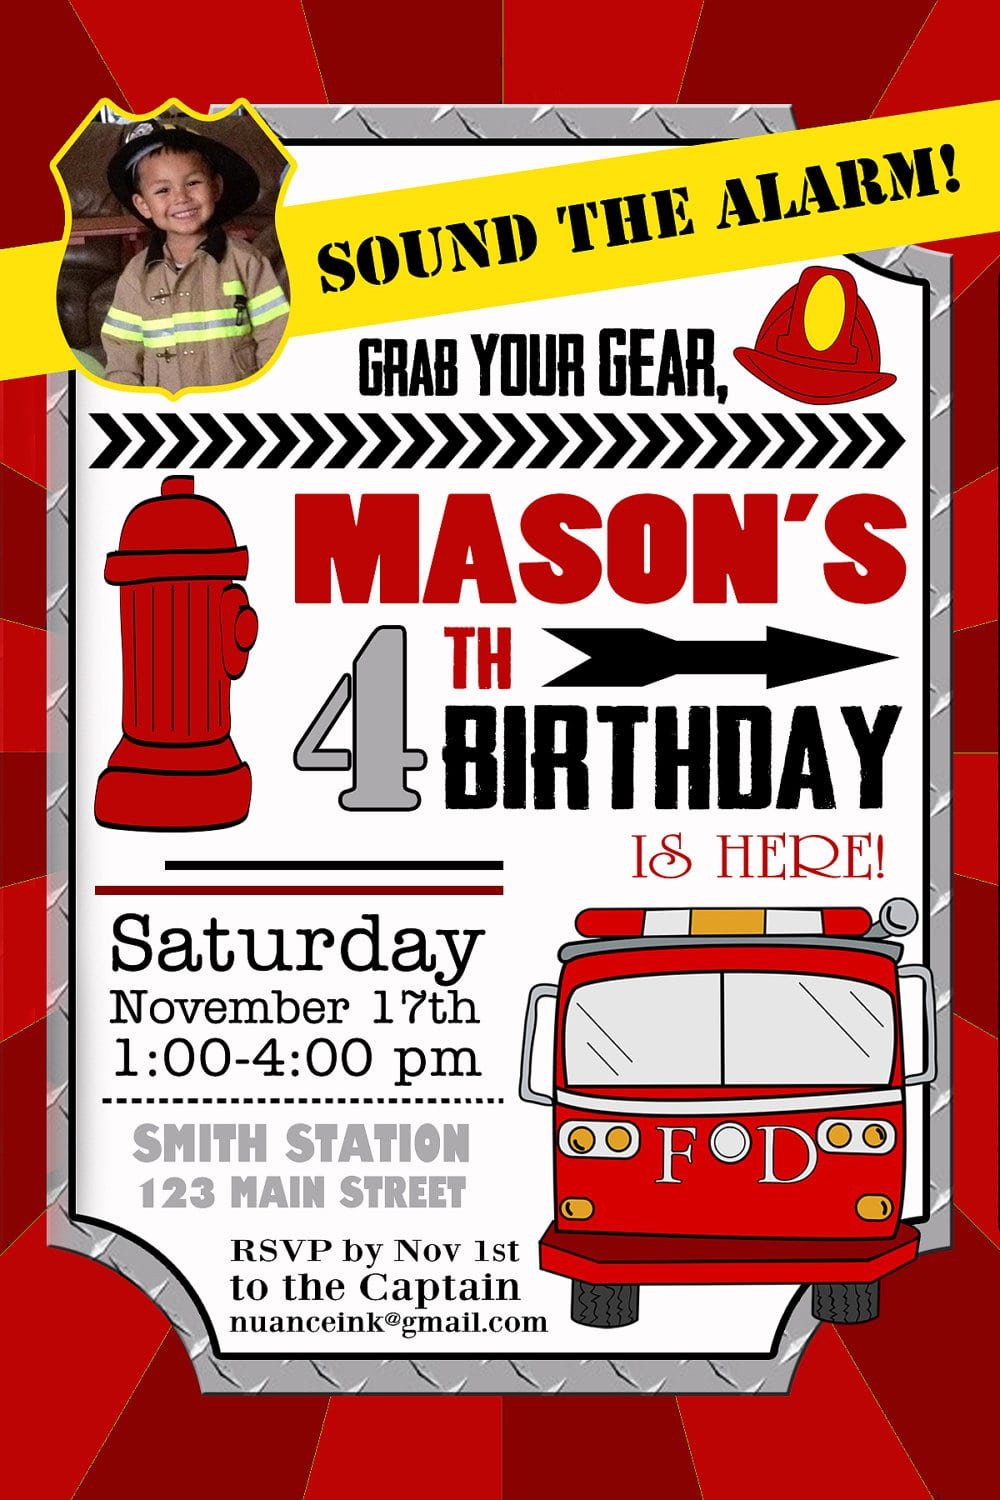 17+ Images About Fireman Themed Birthday Party Ideas On Pinterest